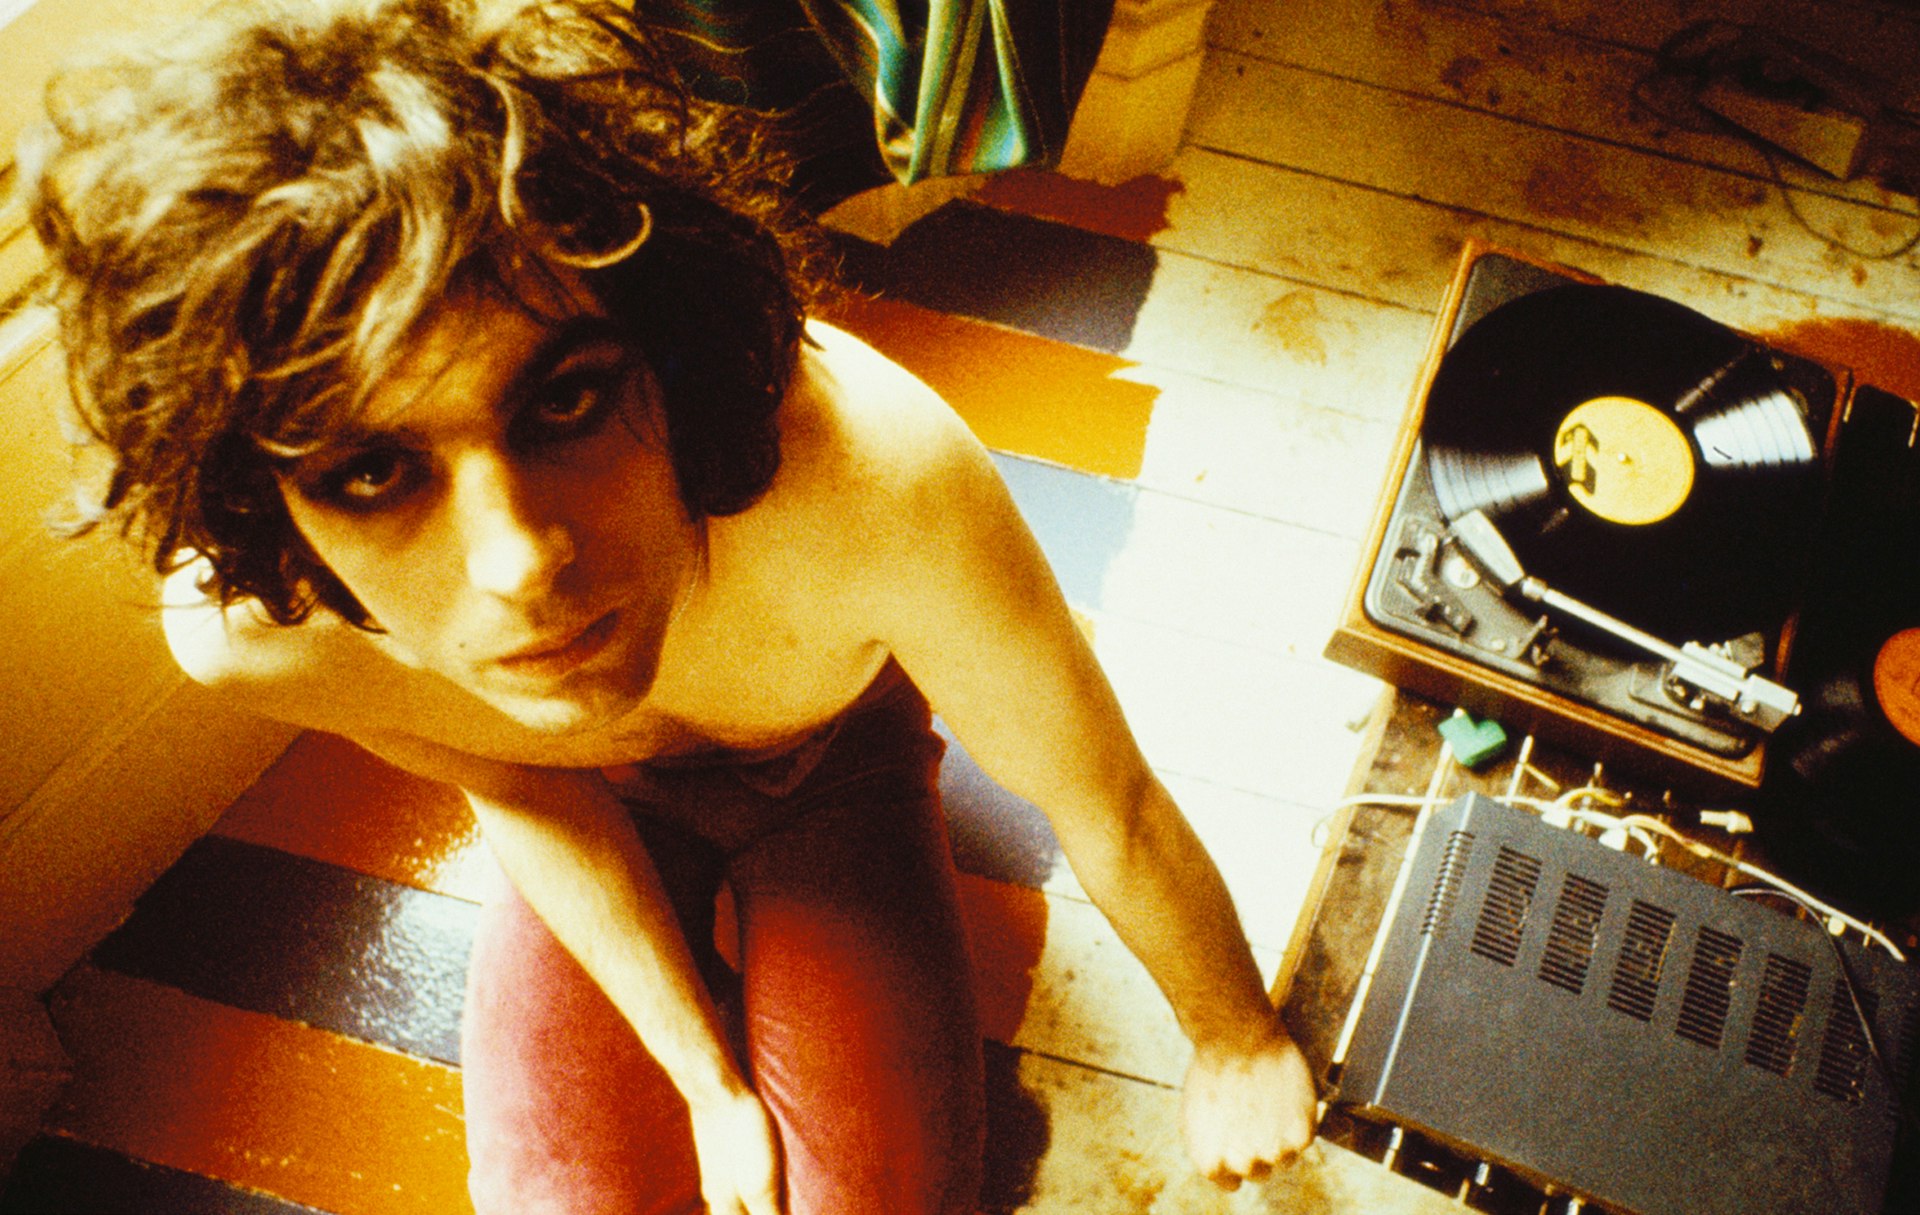 Syd Barrett with record player, London, 1969, © Mick Rock / courtesy The Print Room 